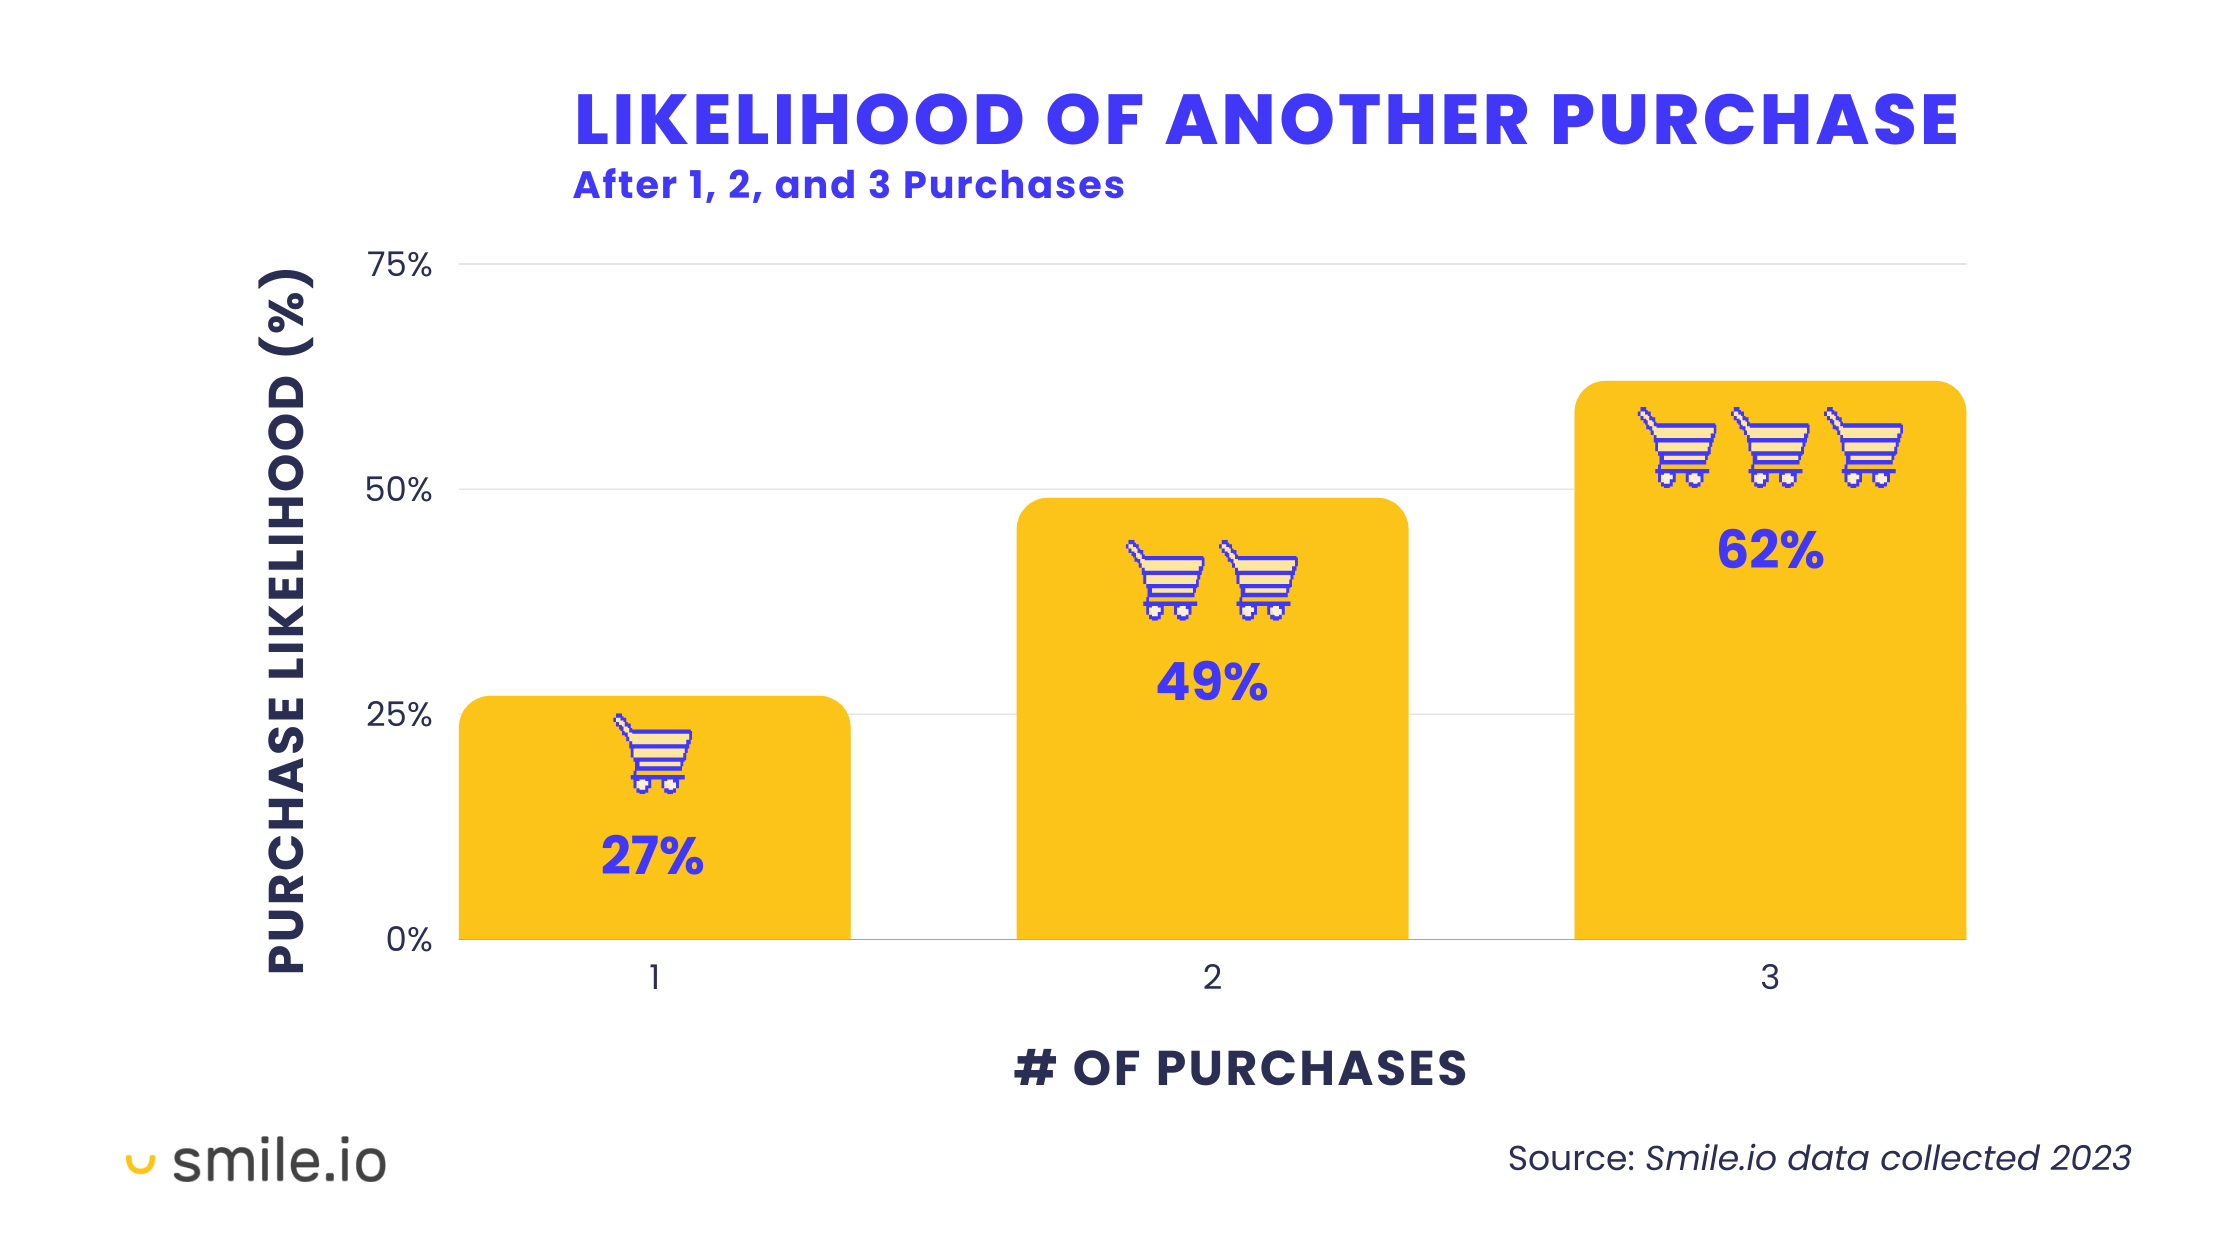 Repeat Customers Profitable–A bar chart showing the likelihood of another purchase after 1, 2, and 3 purchases. The likelihood increases each time.